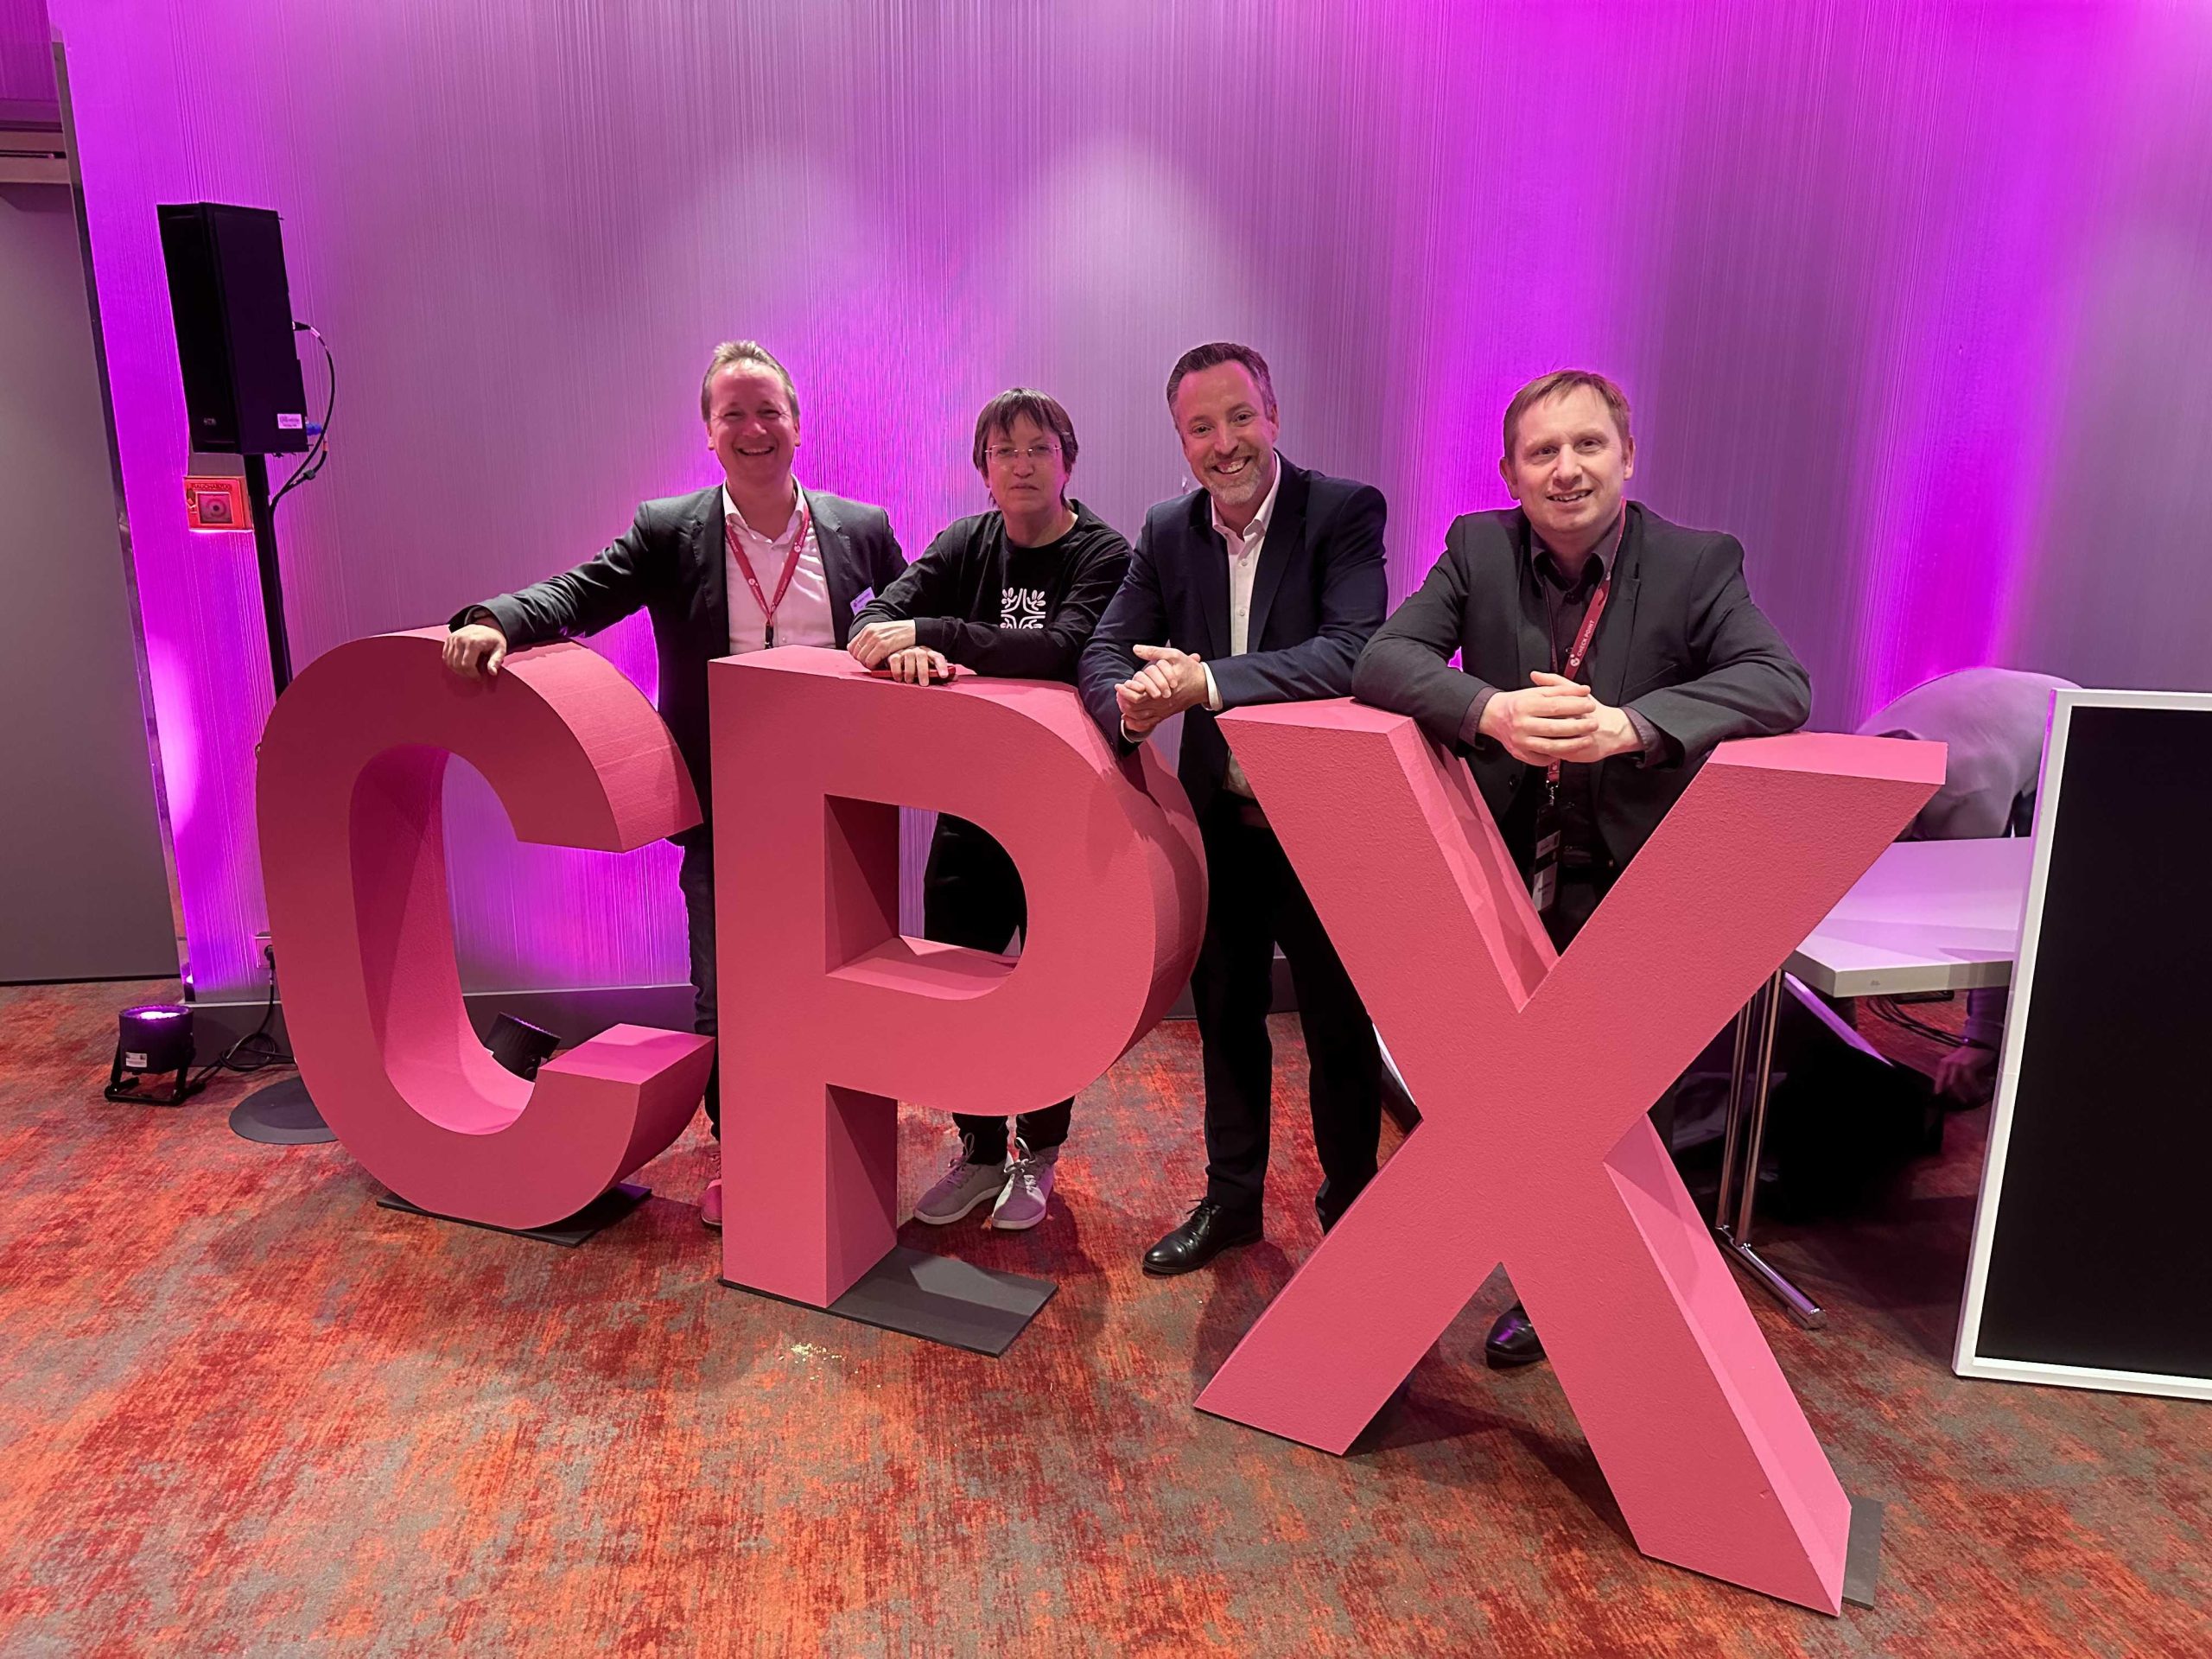 Left to right: Yves Jonczyk (Senior Channel Account Manager DACH at Check Point), Dorit Dor (CTO at Check Point), Felix Mandrella (VP Client Organization at Everphone), Deryck Mitchelson (CISO at Check Point)